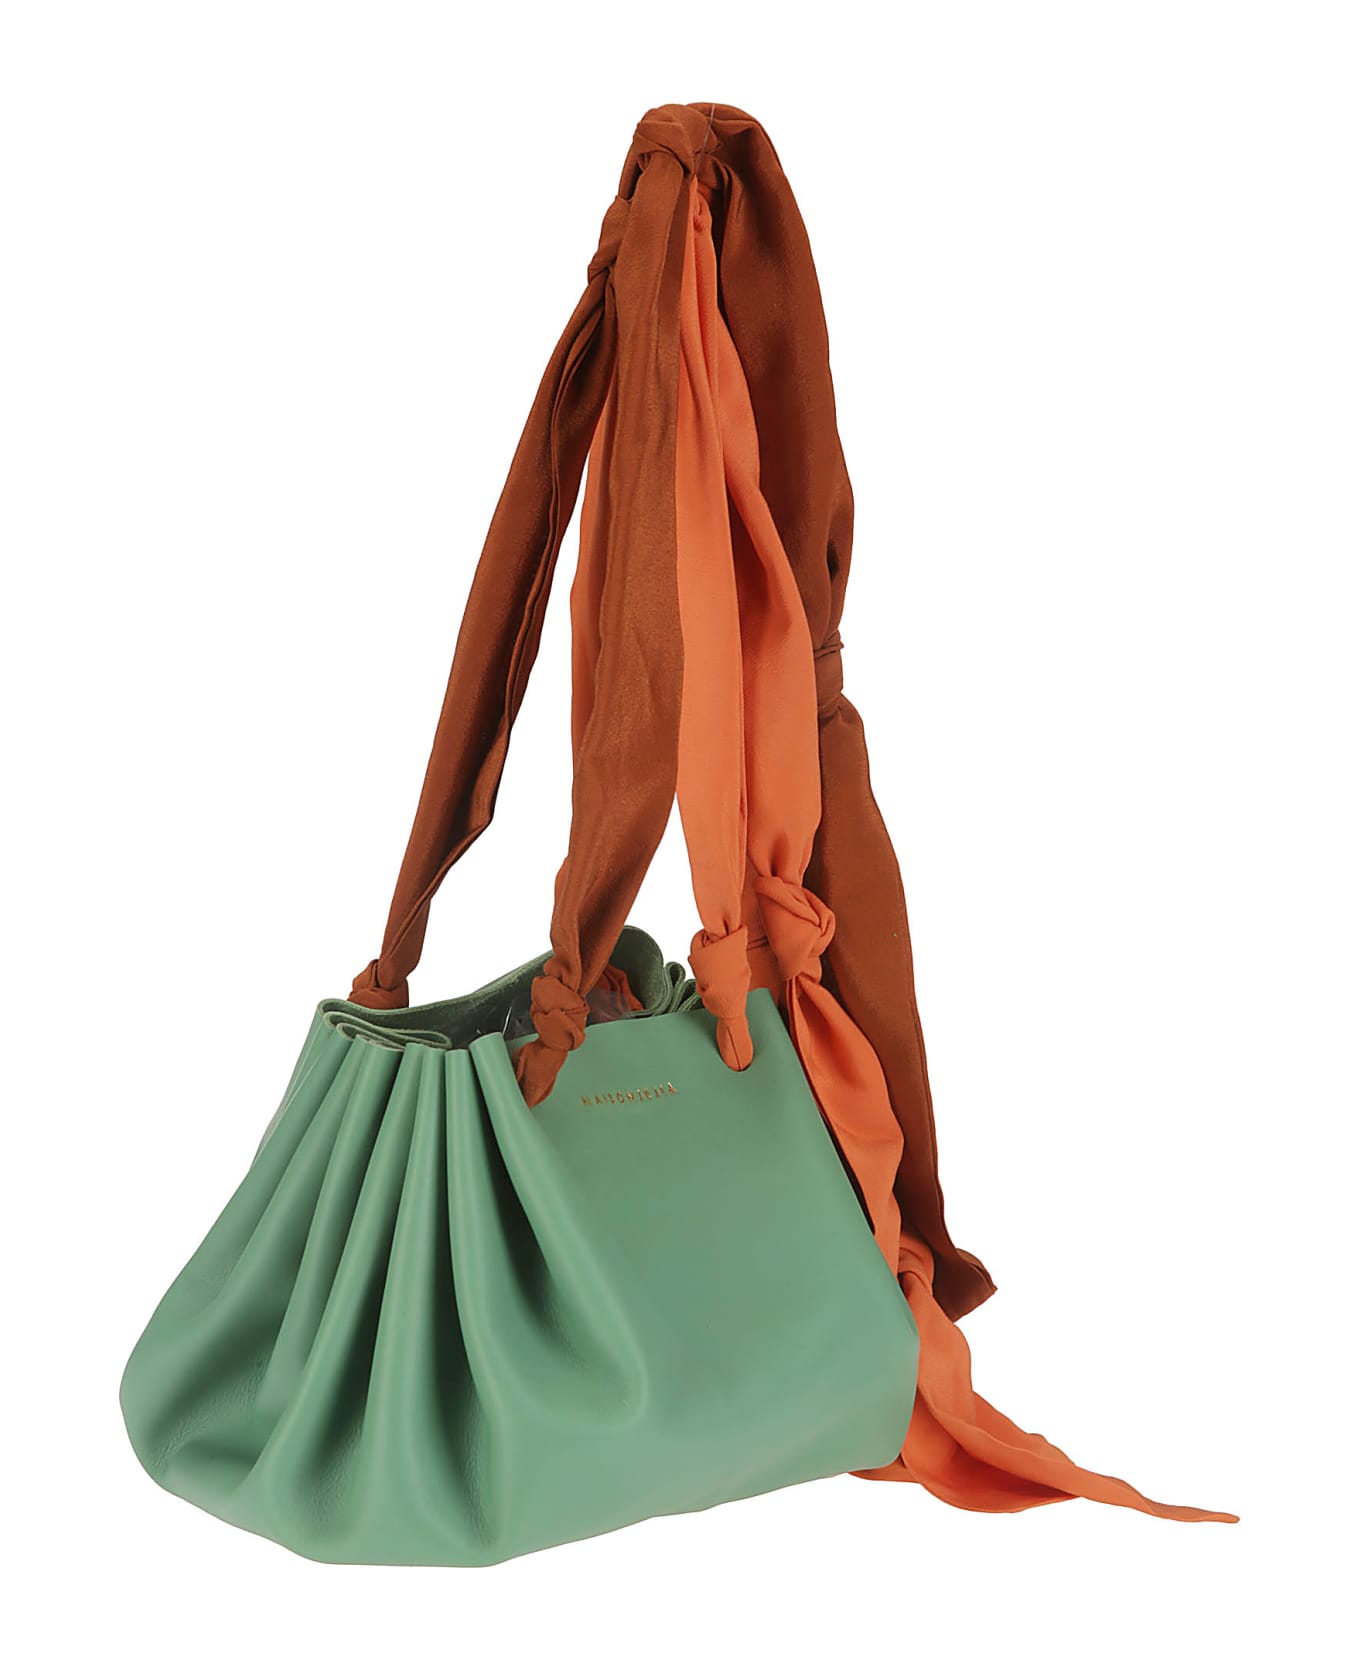 Jejia Loom Baby Bag - GREEN LEATHER A5 COTTON SILK トートバッグ